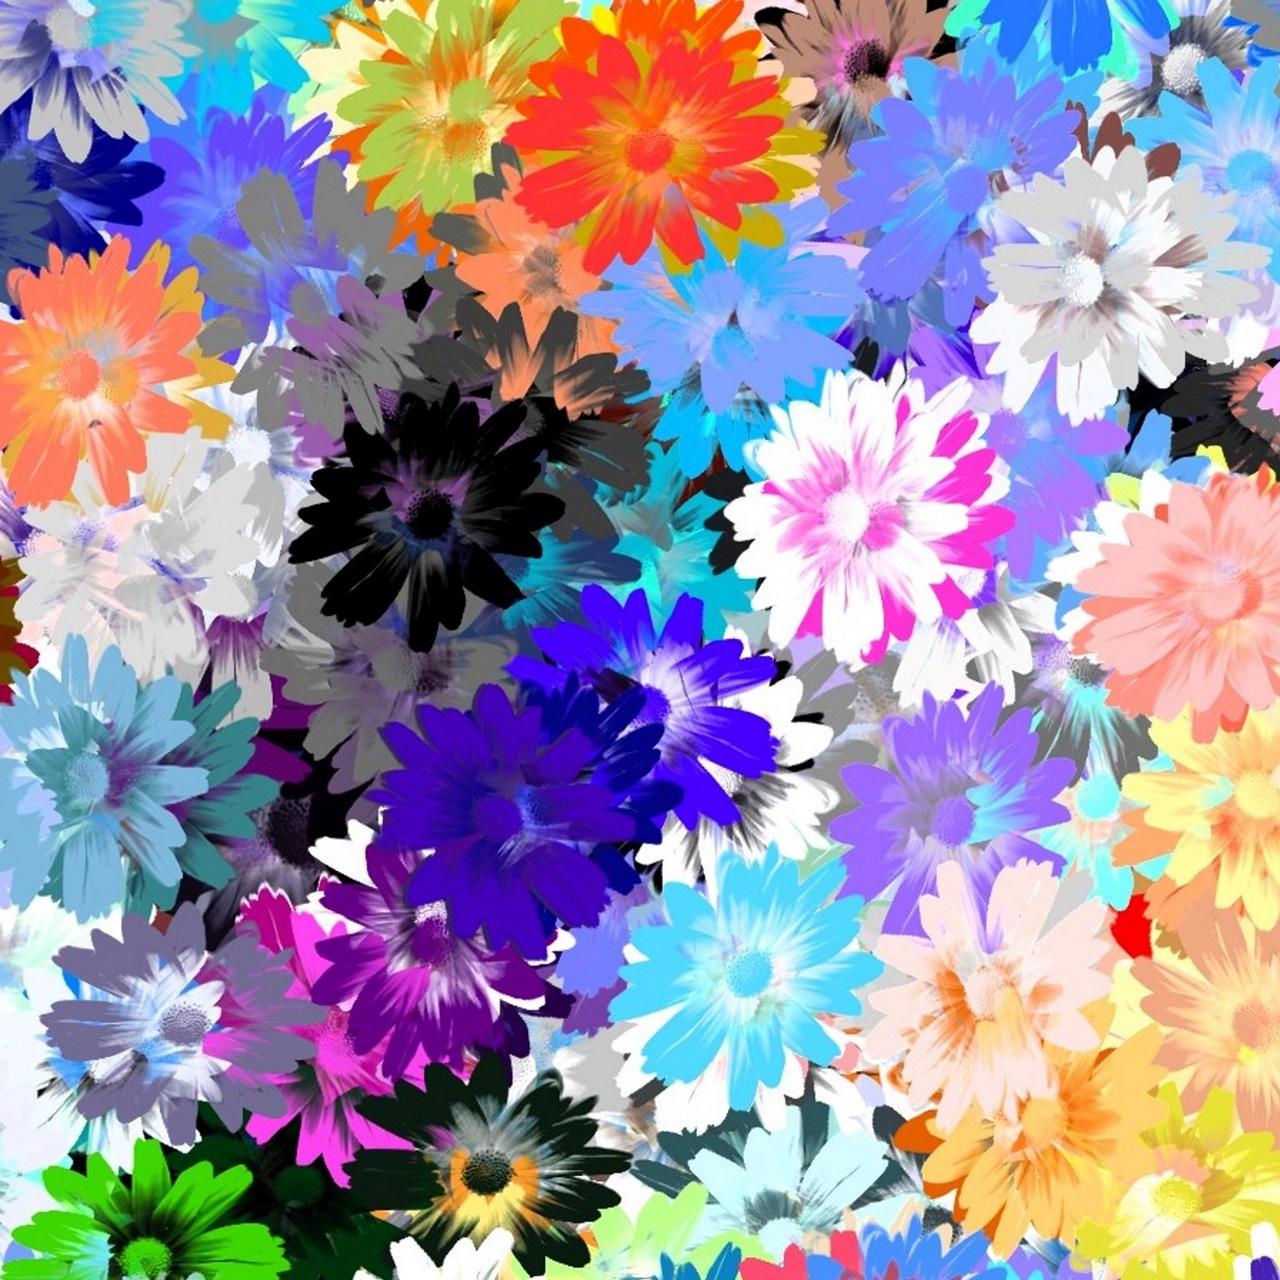 Download wallpaper 1280x1280 flowers, colorful, drawing, oil ipad